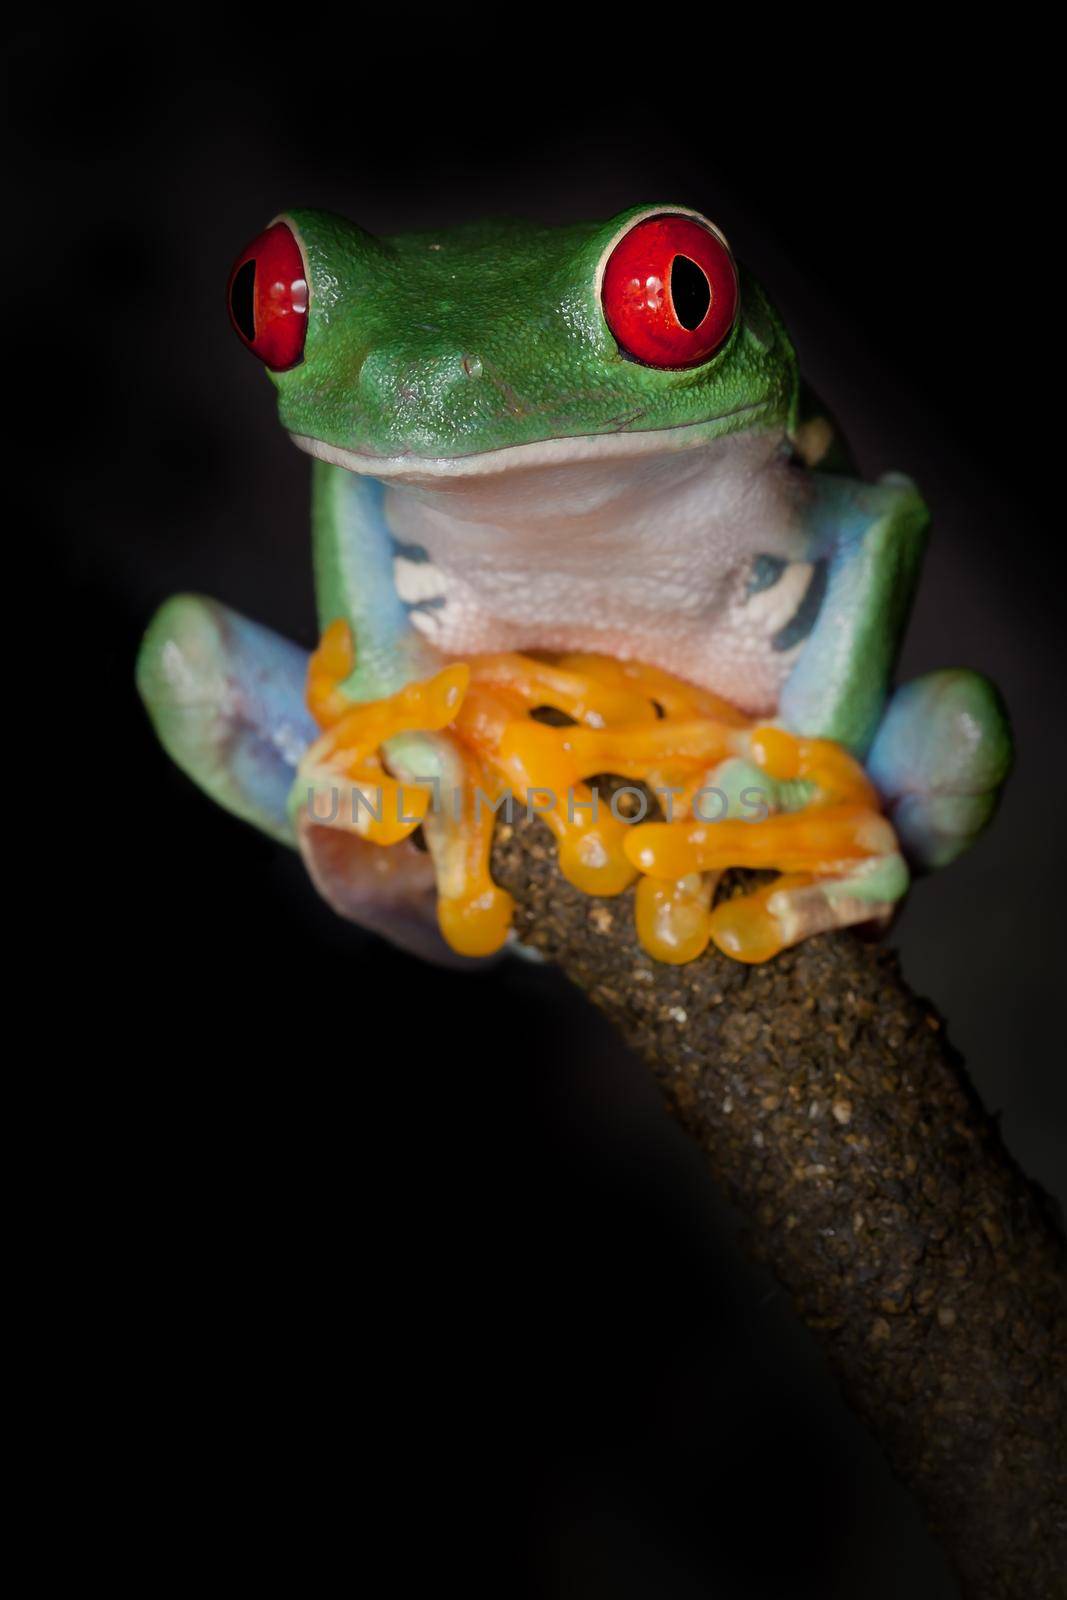 Yoga of Red-eyed frog by Lincikas